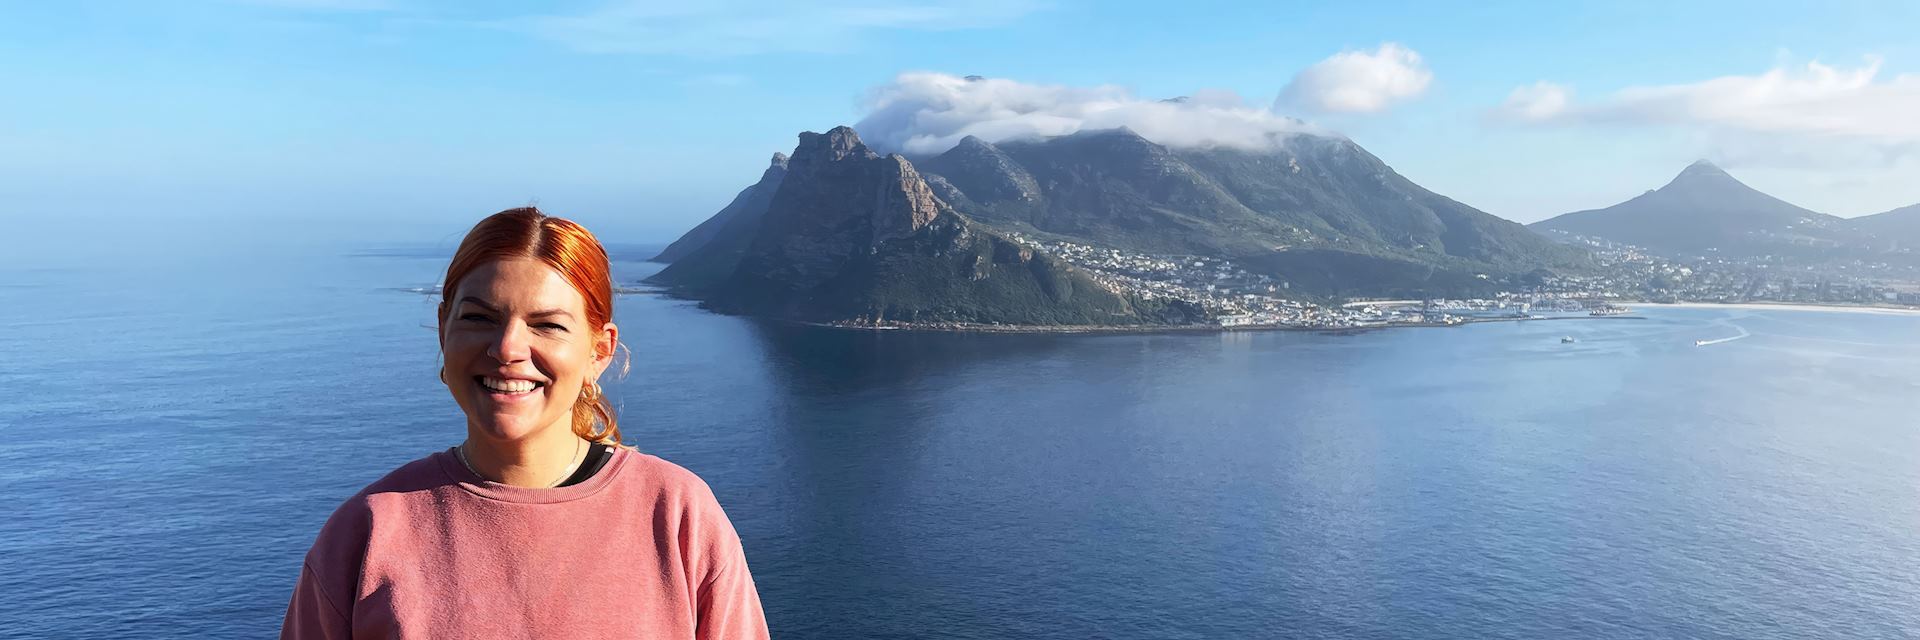 Louise at Cape Peninsula, South Africa